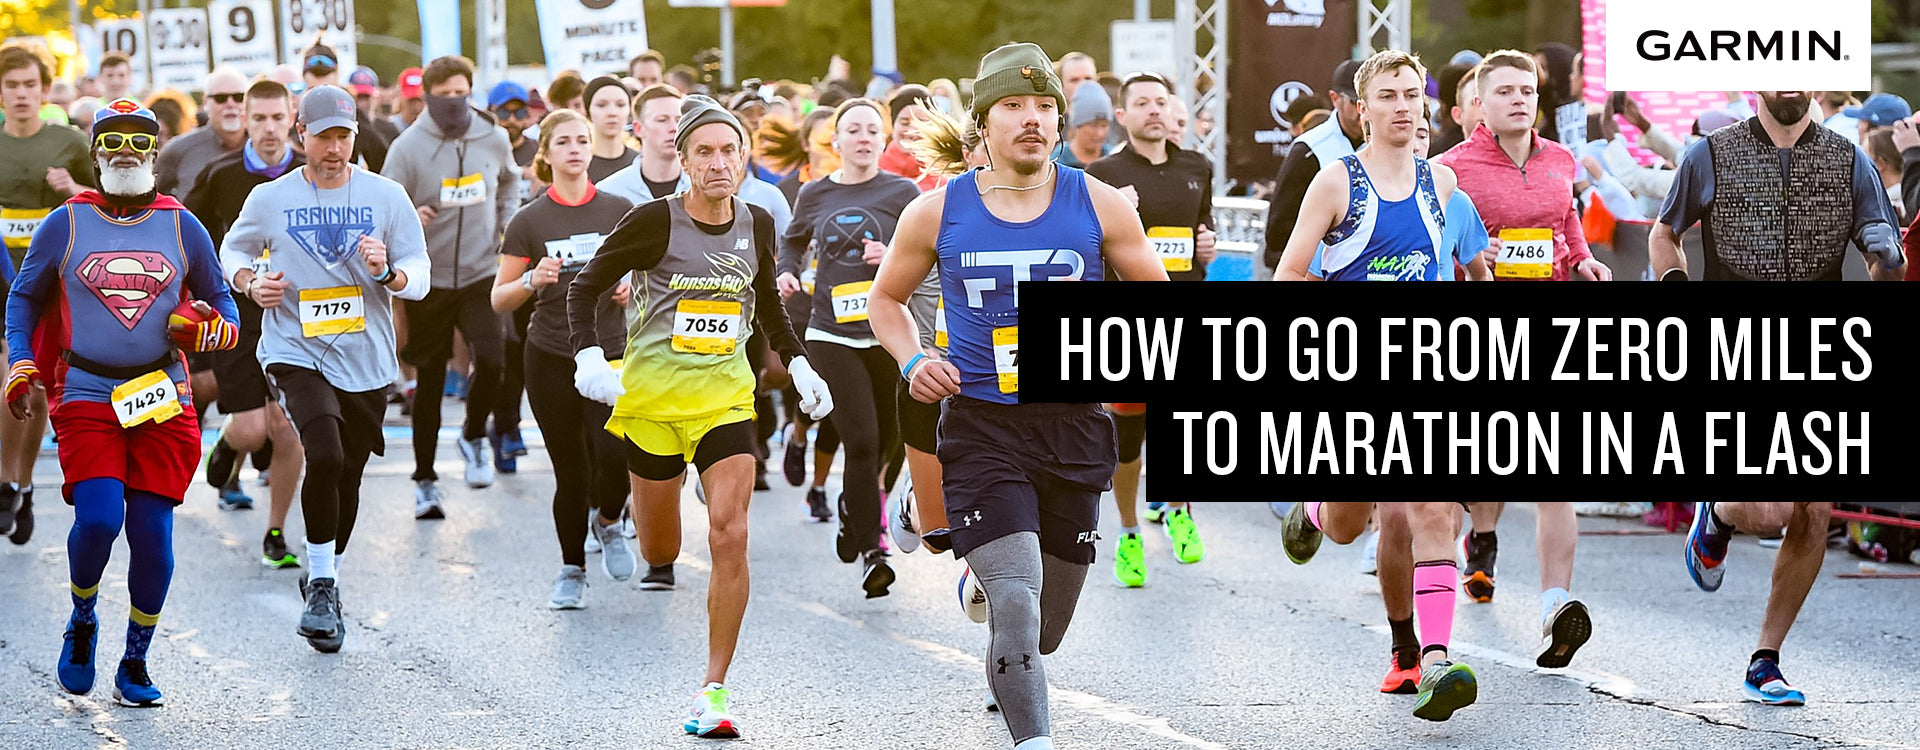 How to Go from Zero Miles to Marathon in a Flash